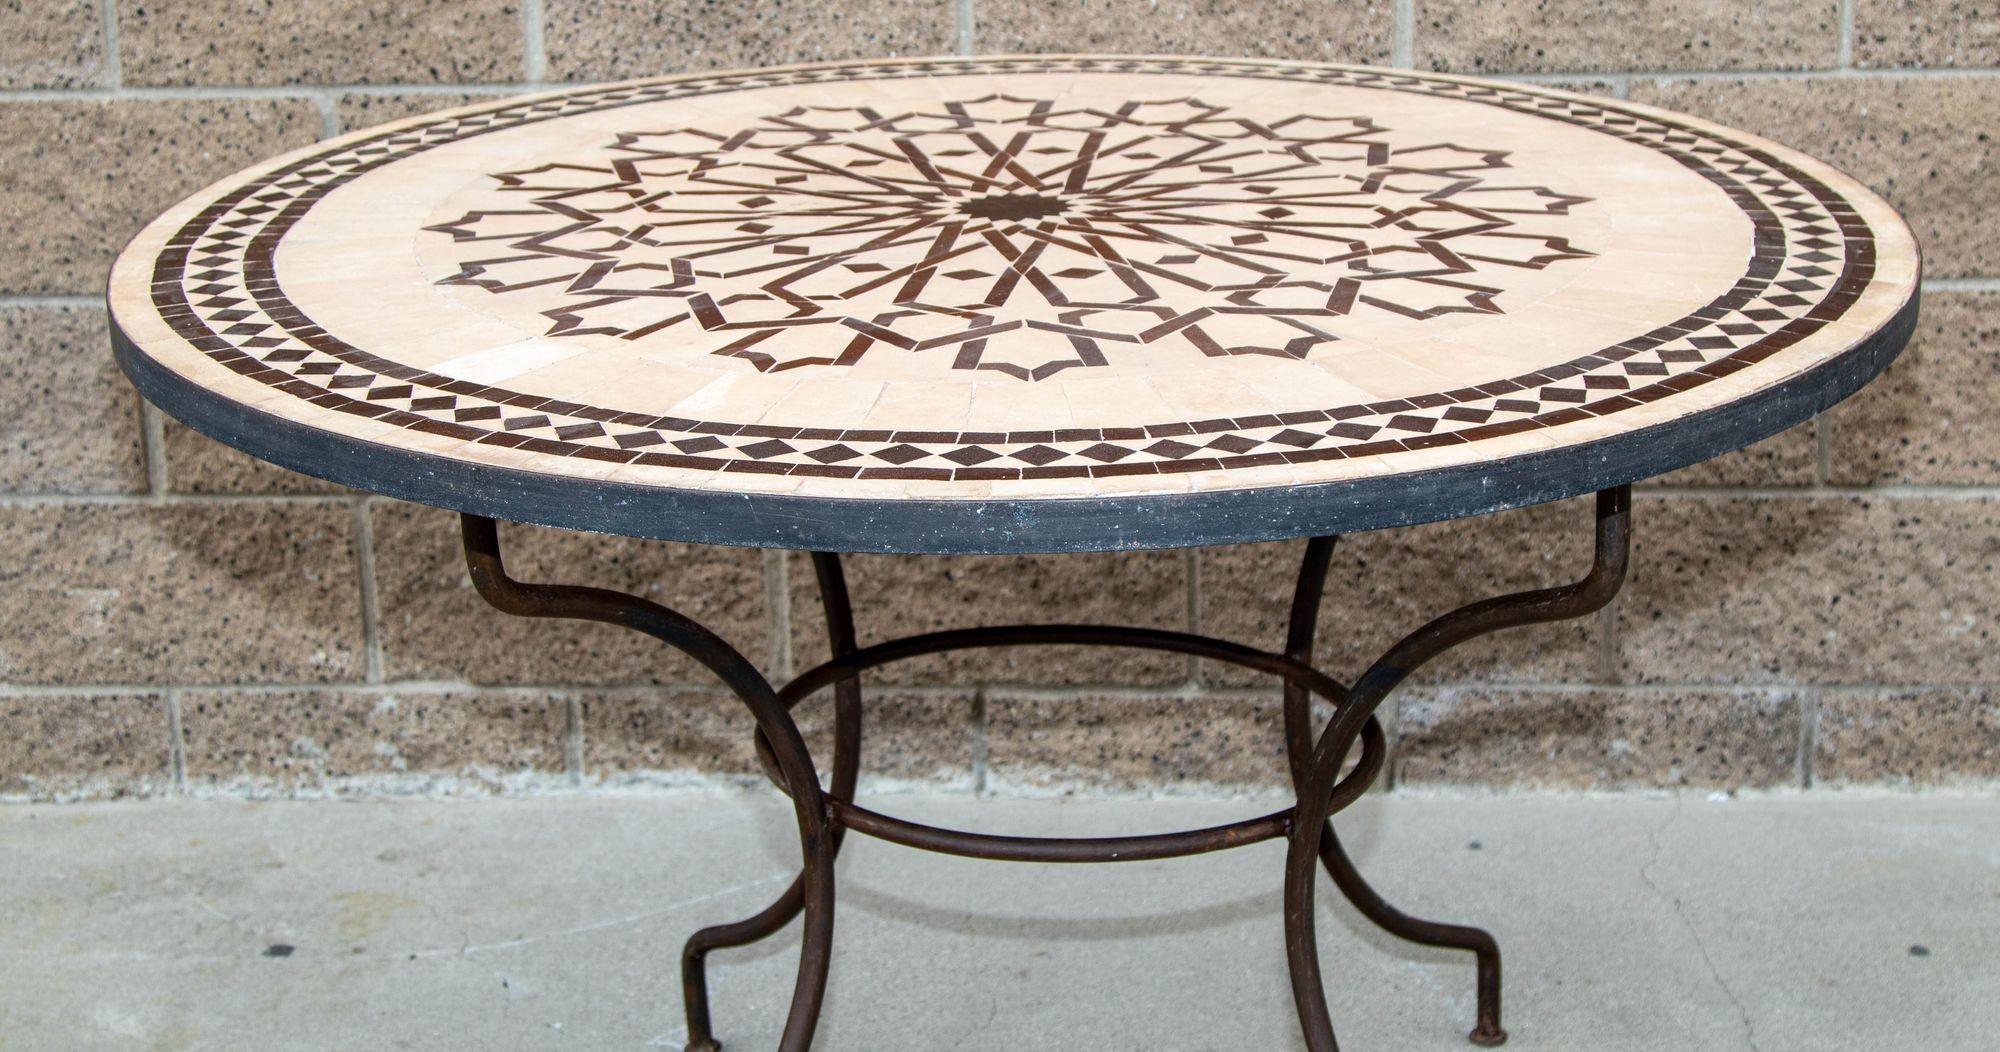 Hand-Carved Moroccan Round Mosaic Outdoor Tile Table with Iron Base